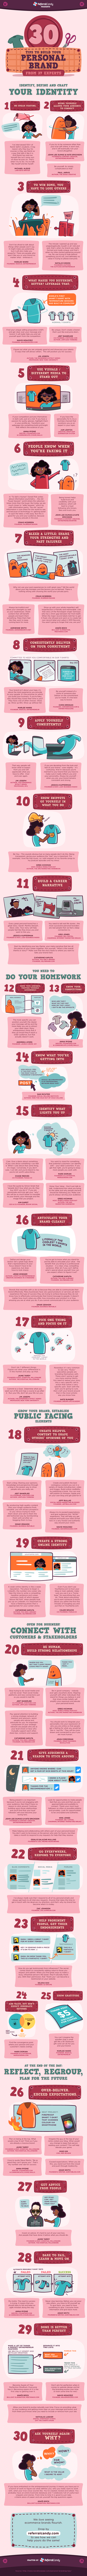 build a personal brand infographic